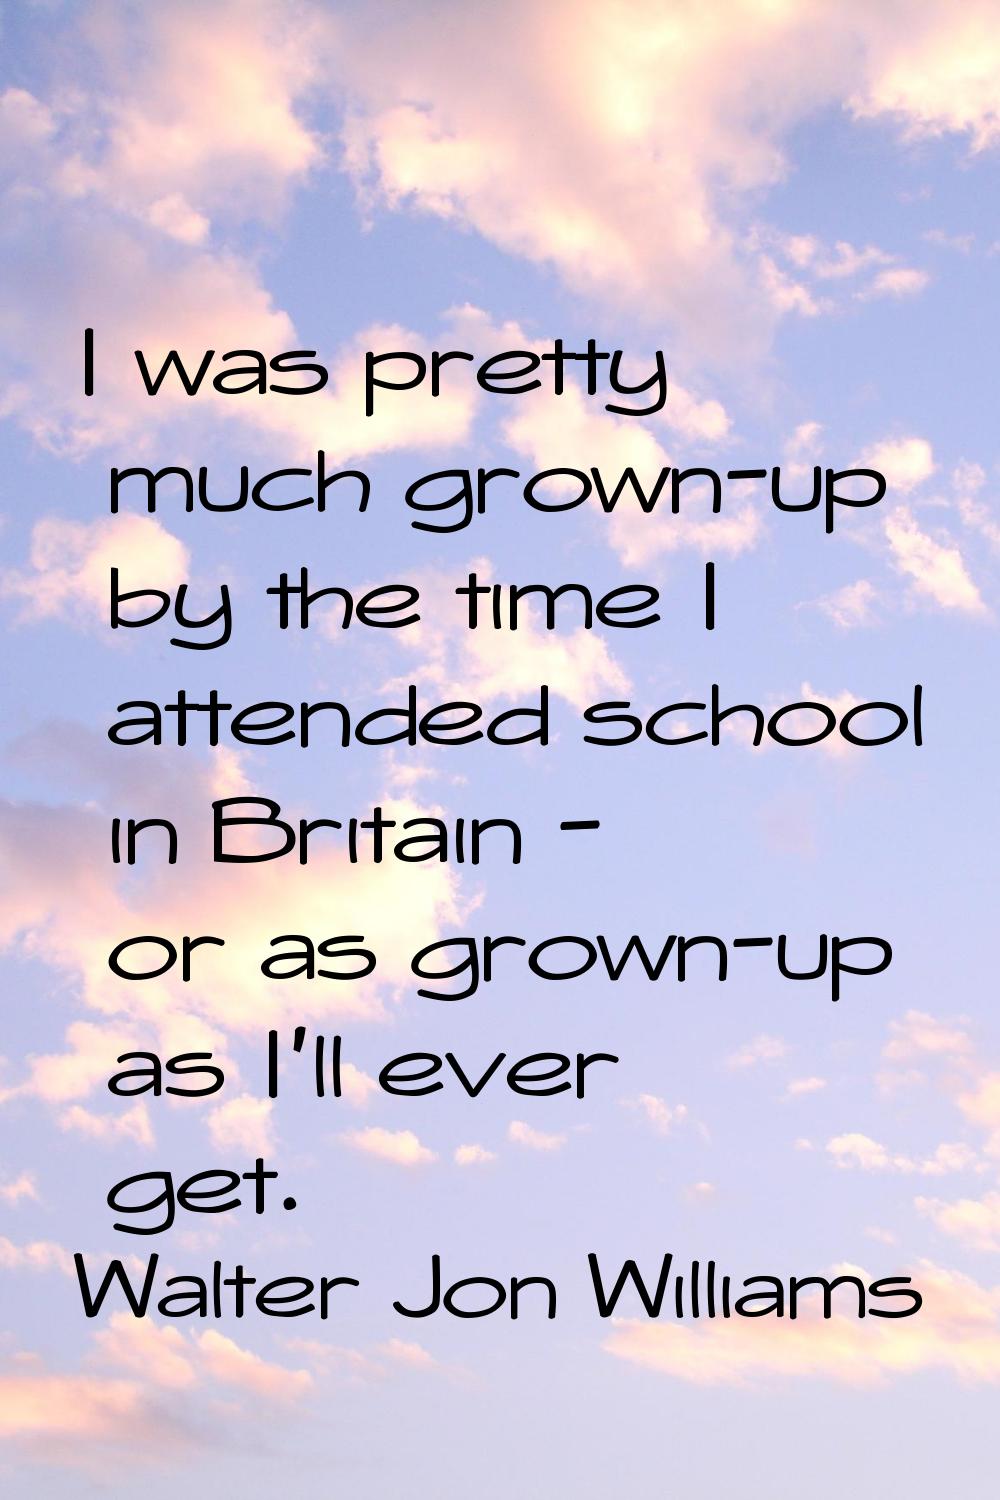 I was pretty much grown-up by the time I attended school in Britain - or as grown-up as I'll ever g